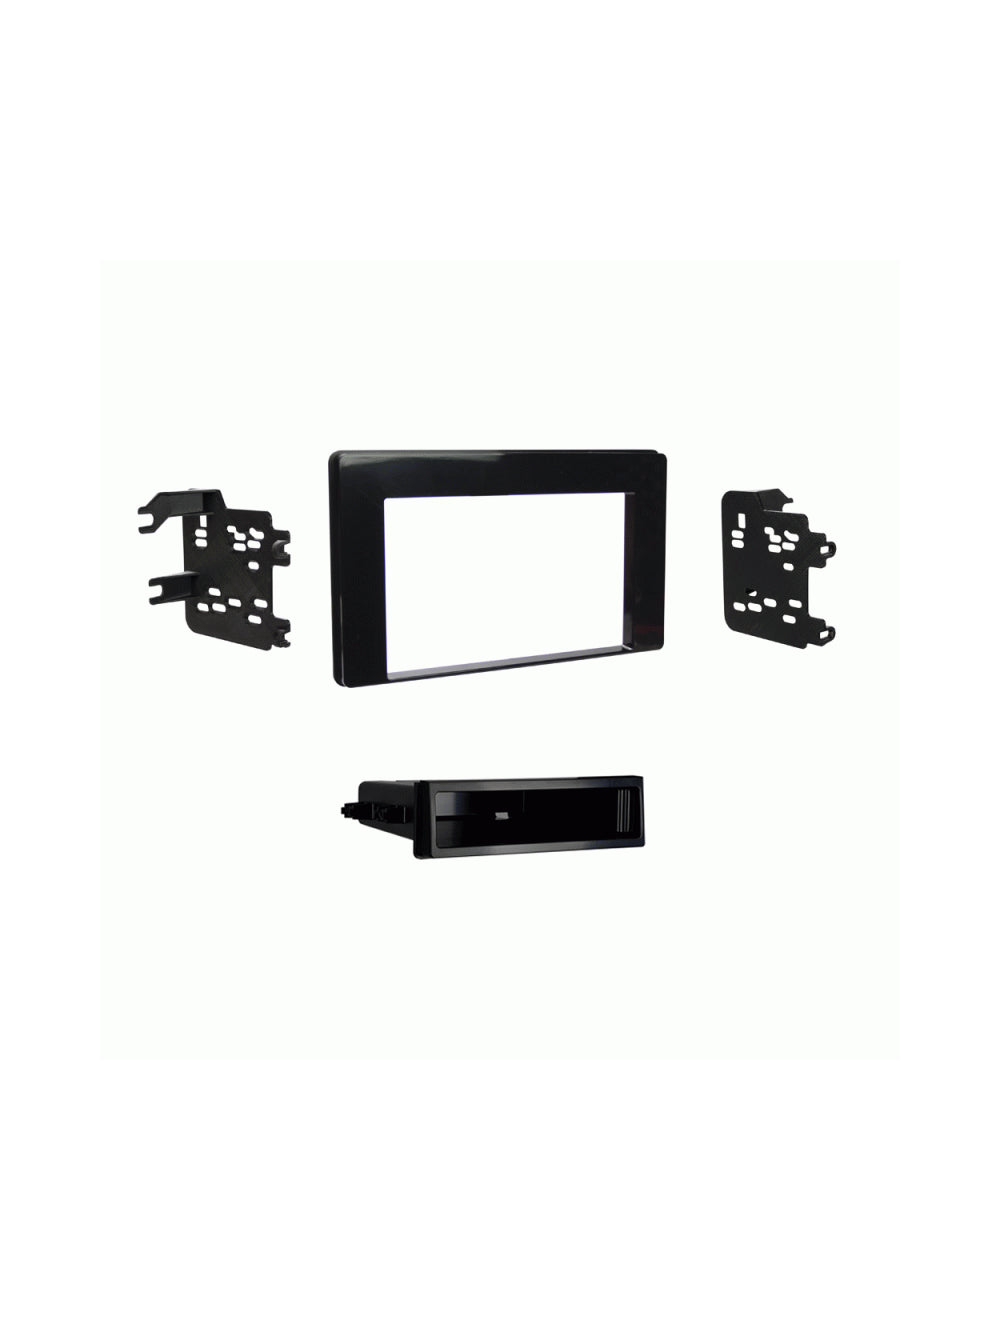 Metra 99-8262HG Single or Double DIN Car Stereo Dash Kit for 2017-Up Toyota Corolla